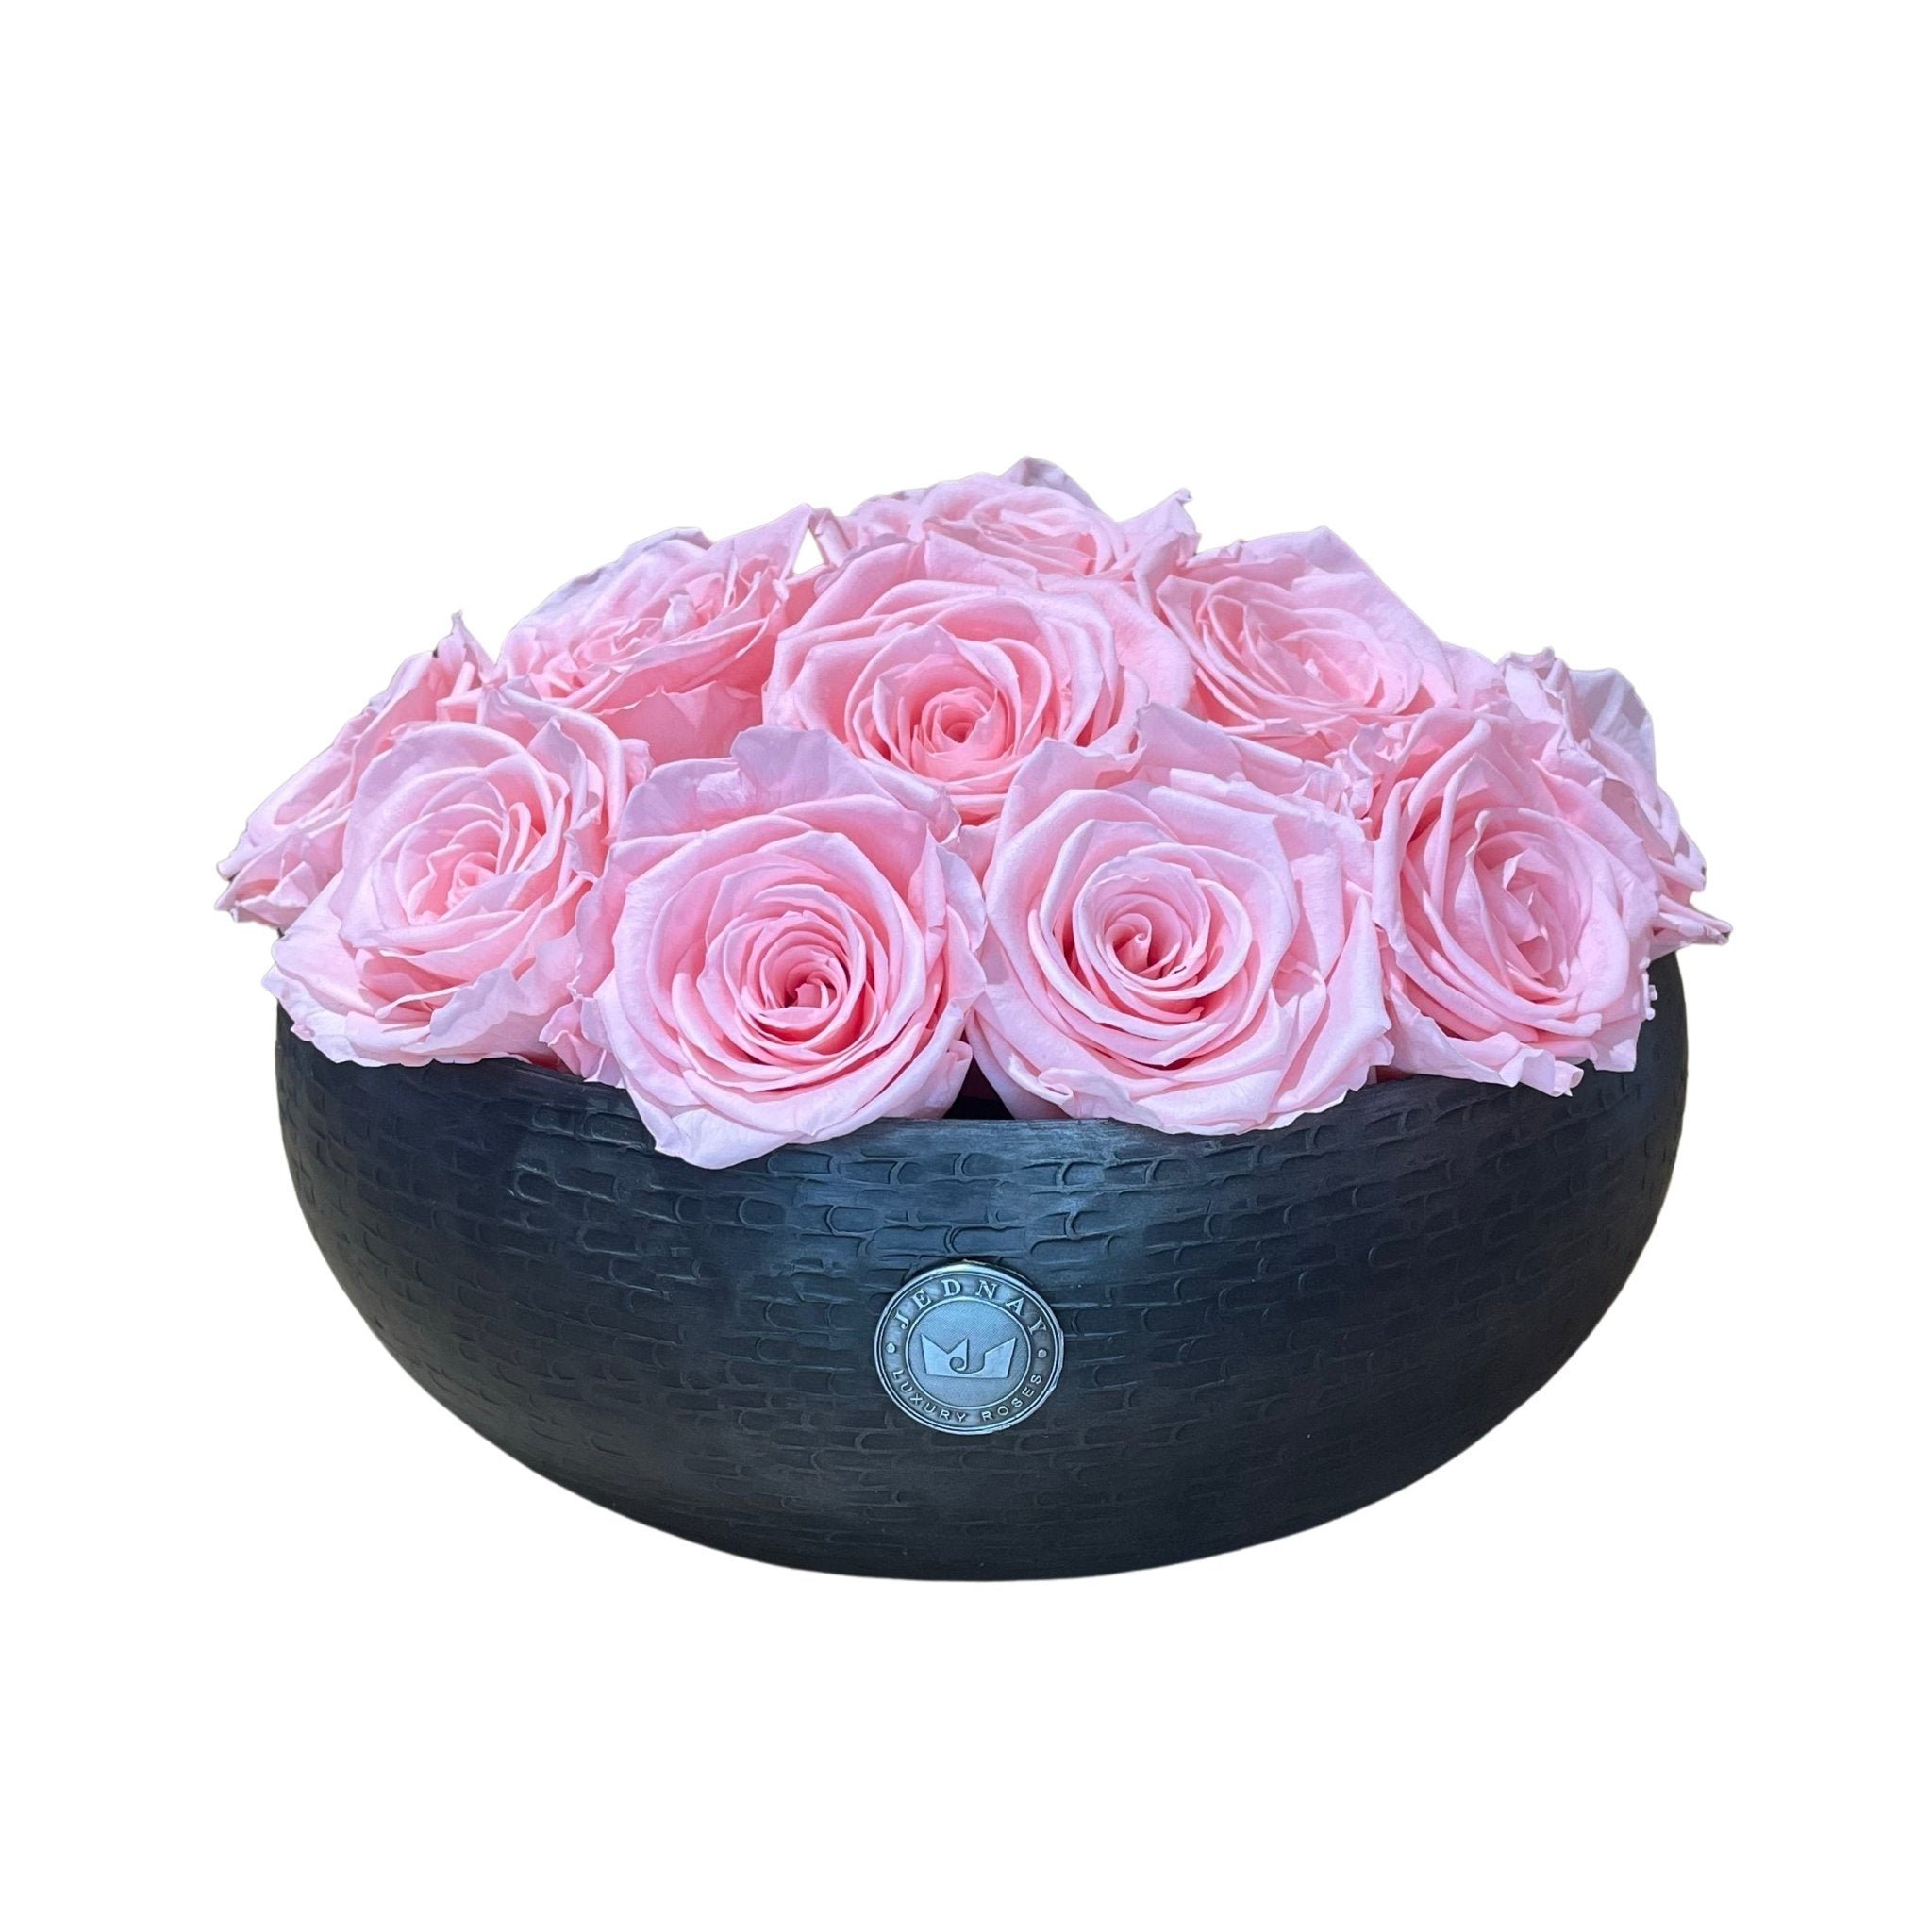 The Knightsbridge - Soft Pink Forever Roses - Pewter Bowl - Jednay Roses